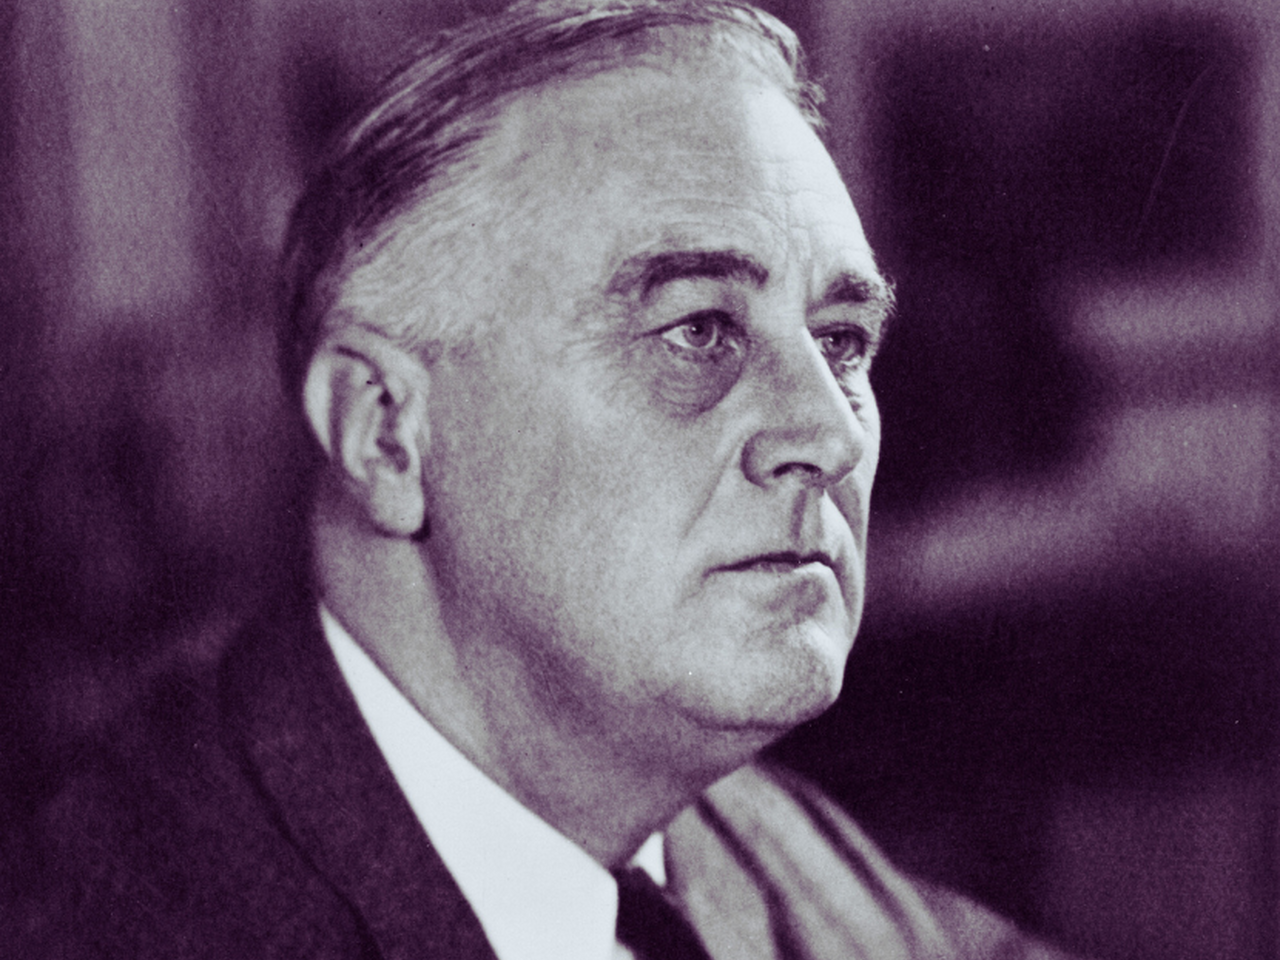 Photo of FDR.